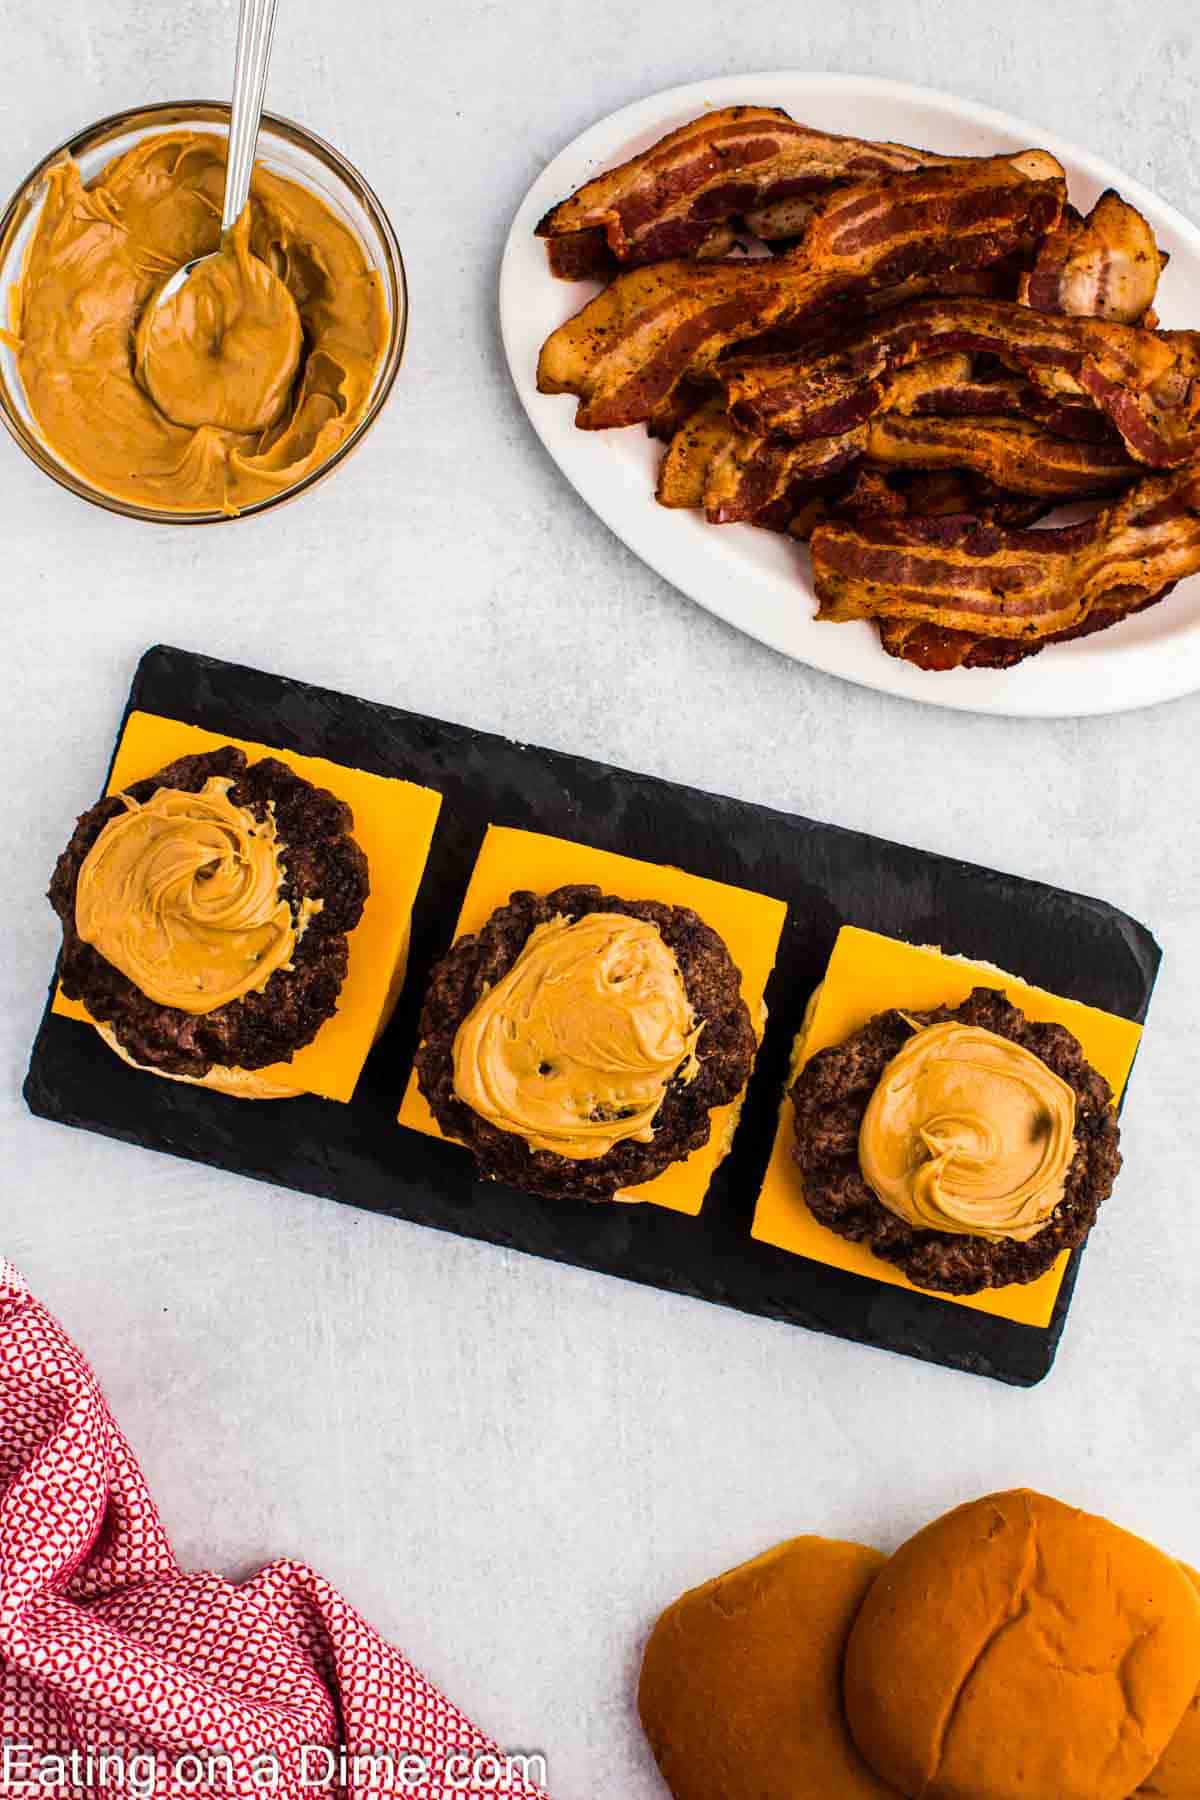 Hamburger patties topped with peanut butter and a plate of bacon and a bowl of creamy peanut butter